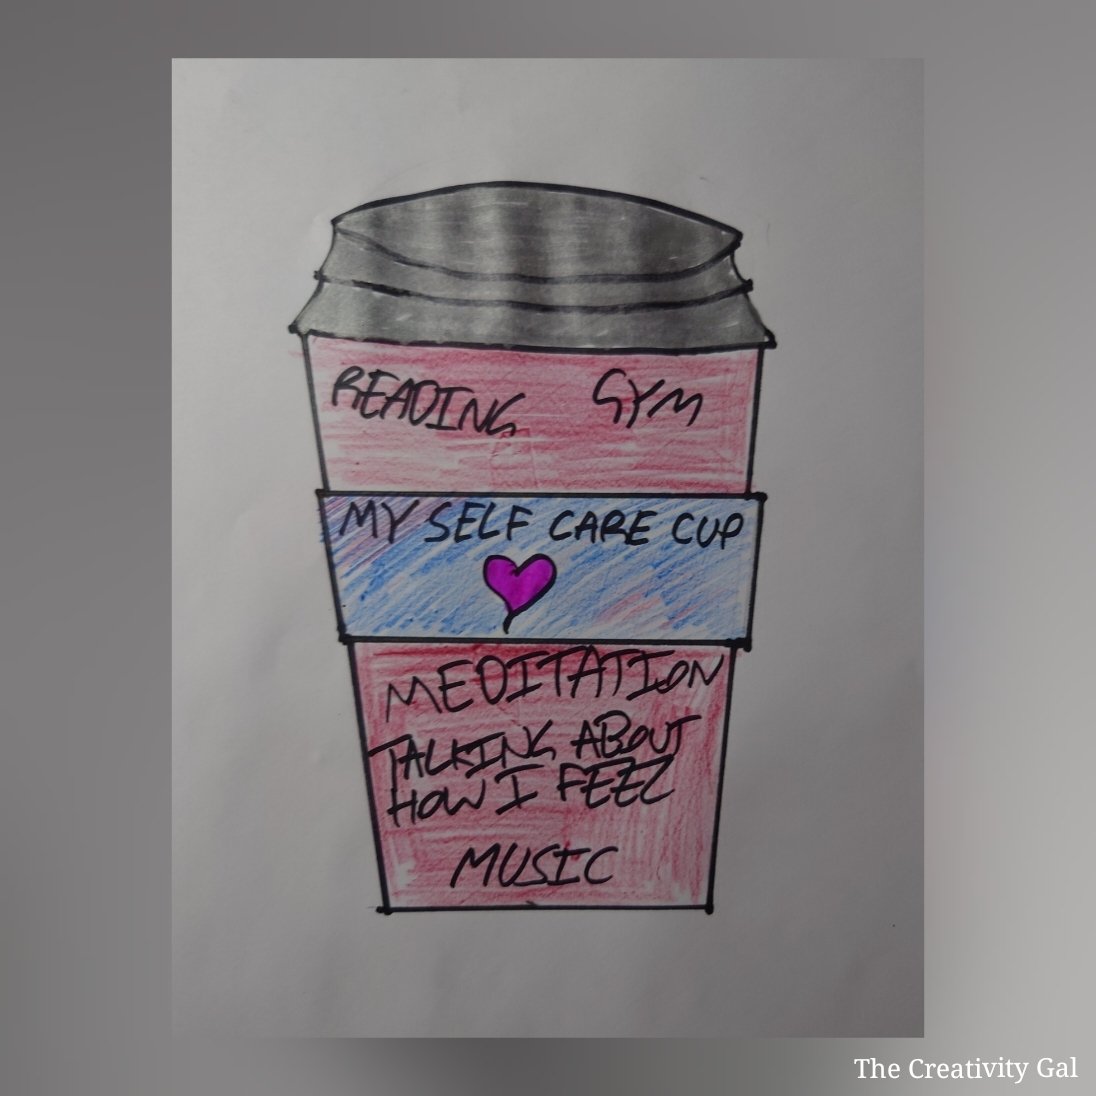 Self Care Sunday!
You know that saying 'you can't pour from an empty cup'?
Well it's true, so here is the self care cup! Draw a cup (or ask me for a template) and write in the things you do for self care.
#creativewellbeing